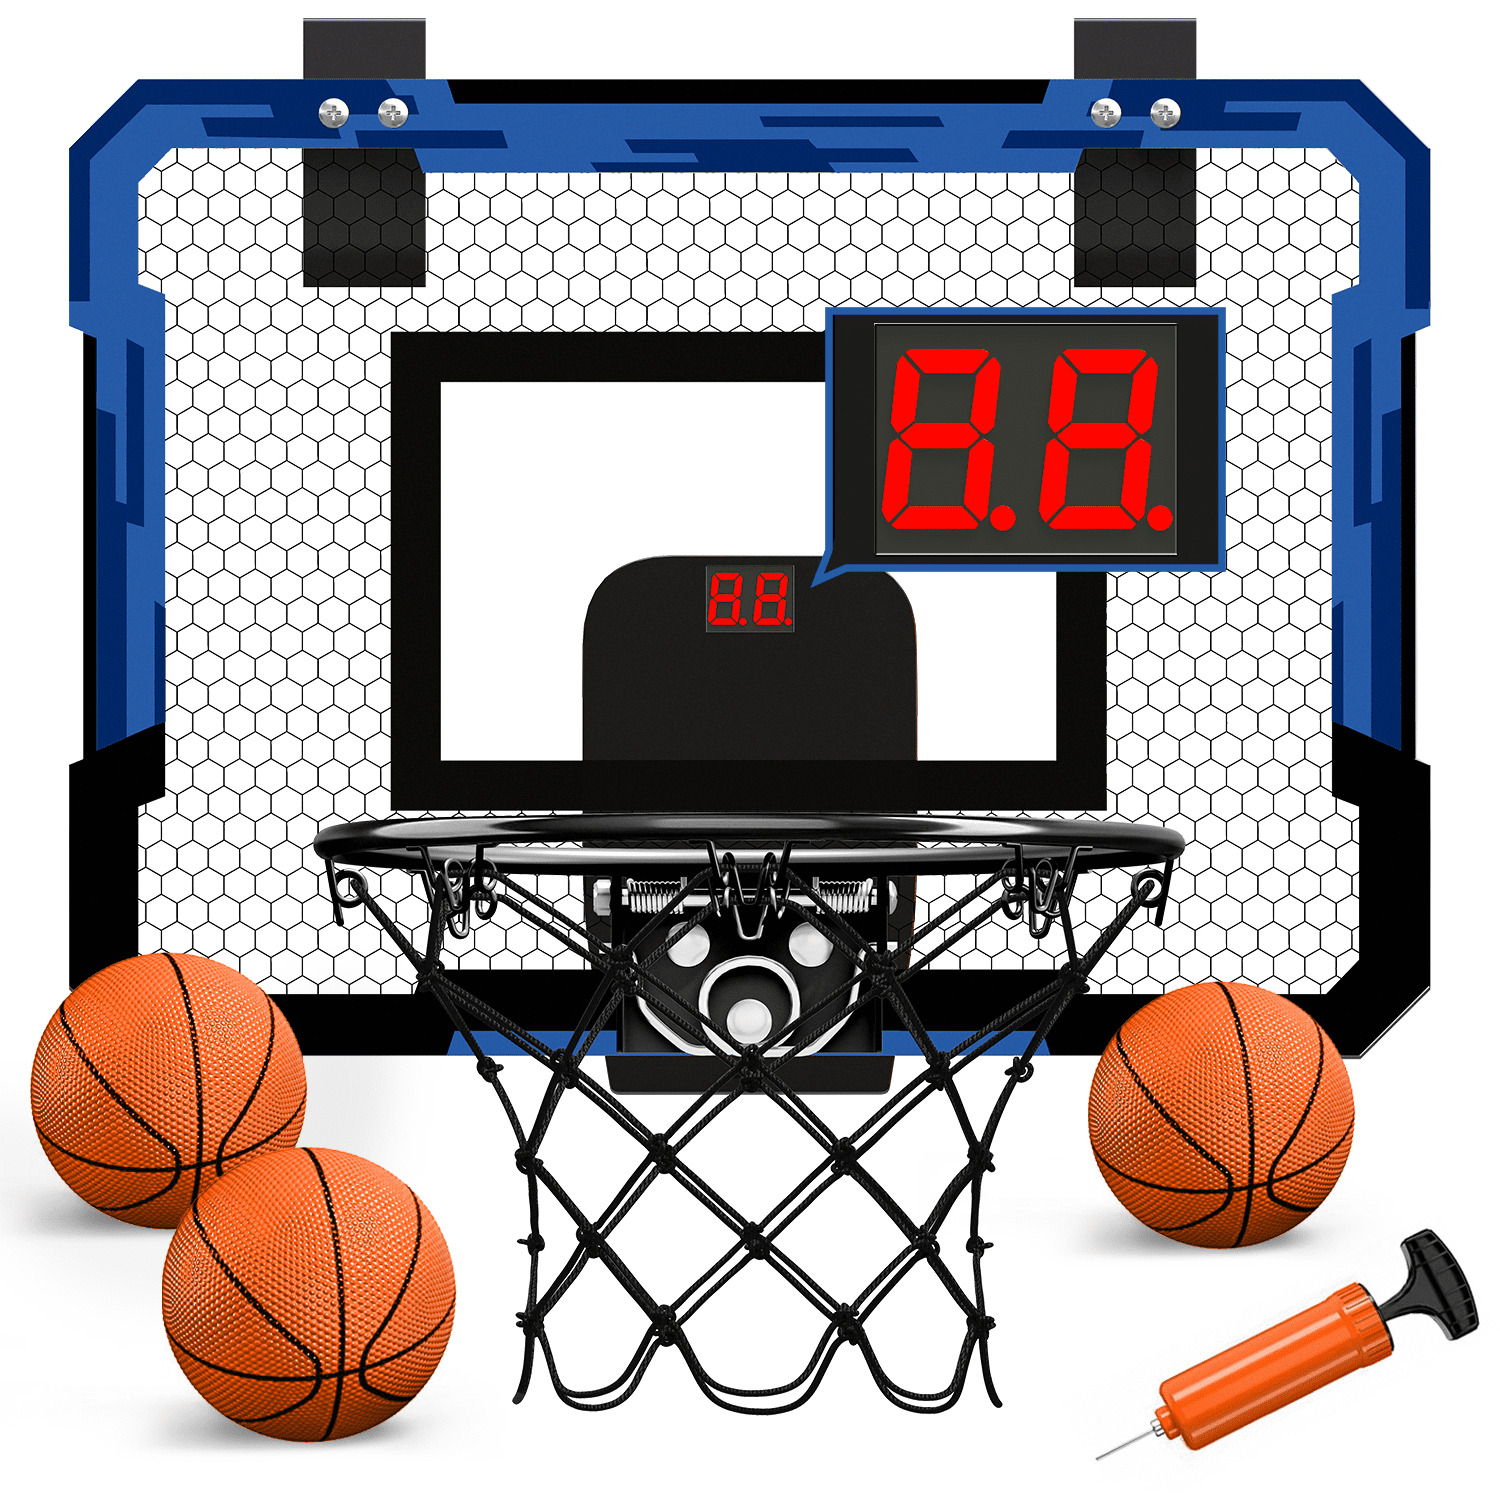 QDRAGON Mini Basketball Hoop with Electronic Scorer, Mini Hoop with 3  Balls/Inflator/Breakaway Rim, Basketball Toy Gifts for Kids and Adults,  Suit for